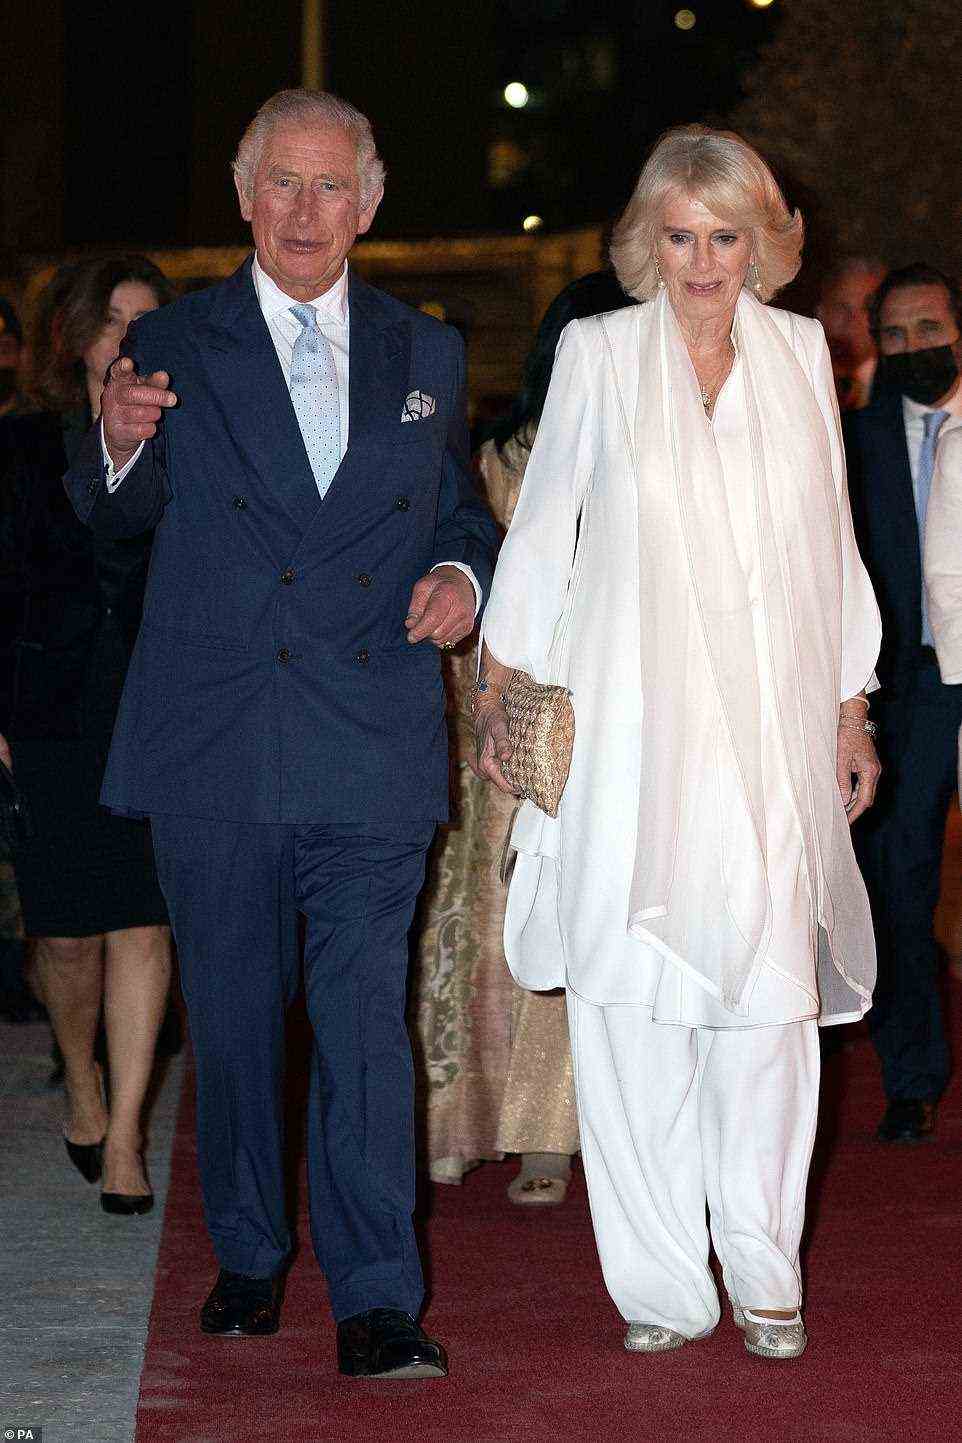 The Prince of Wales, 73, and the Duchess of Cornwall, 74, attended a centenary celebration of the founding of the Jordanian state at the Jordan Museum in Amman on the second day of their tour of the Middle East this evening